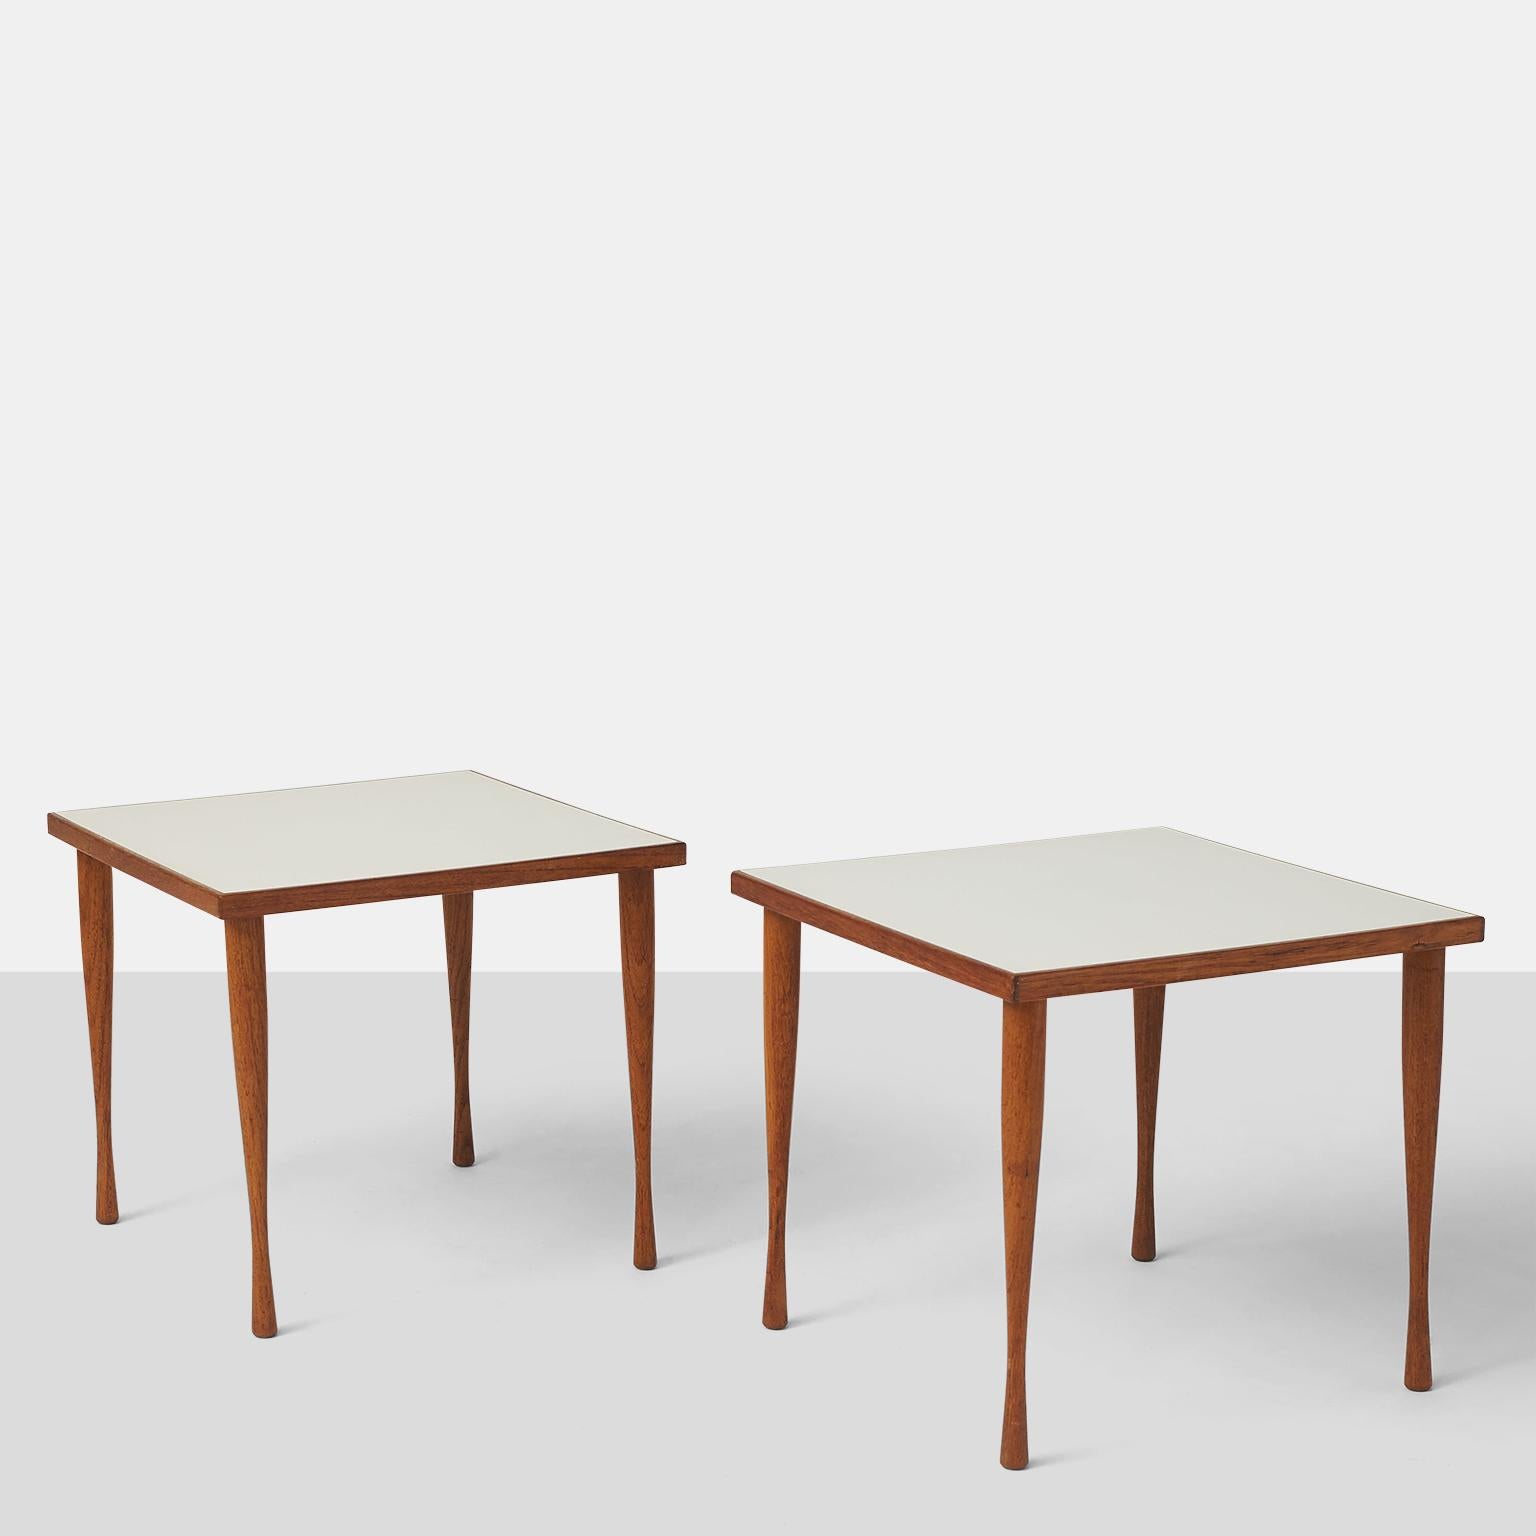 A pair of stacking side tables in walnut by Hans Anderson with inset white laminate top and shaped legs. 
Retains the original makers label.